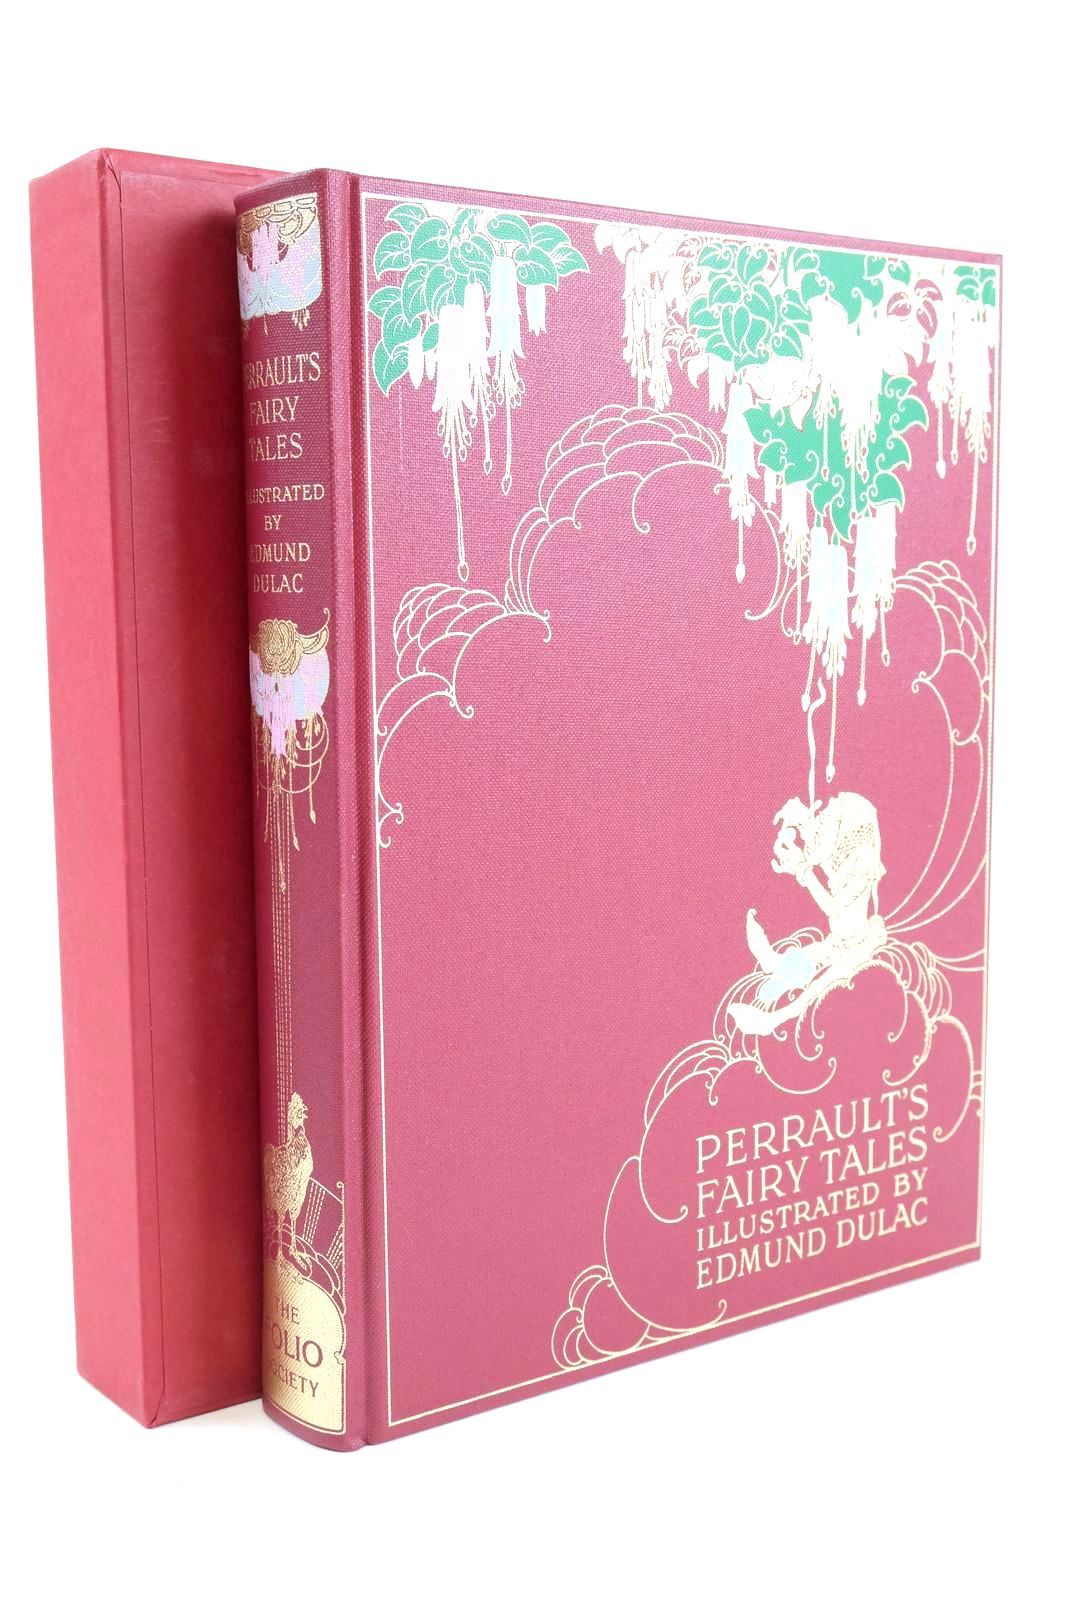 Photo of THE FAIRY TALES OF CHARLES PERRAULT- Stock Number: 1324728